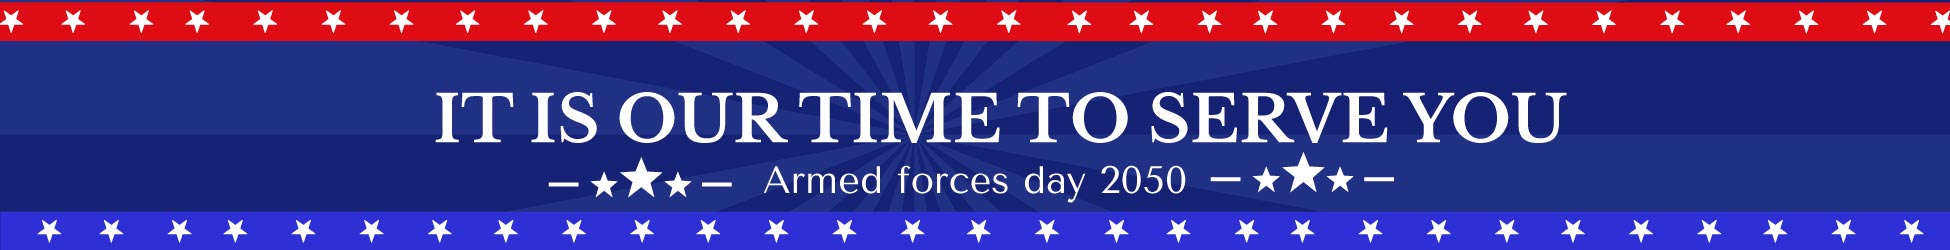 Free Armed Forces Day Website Banner